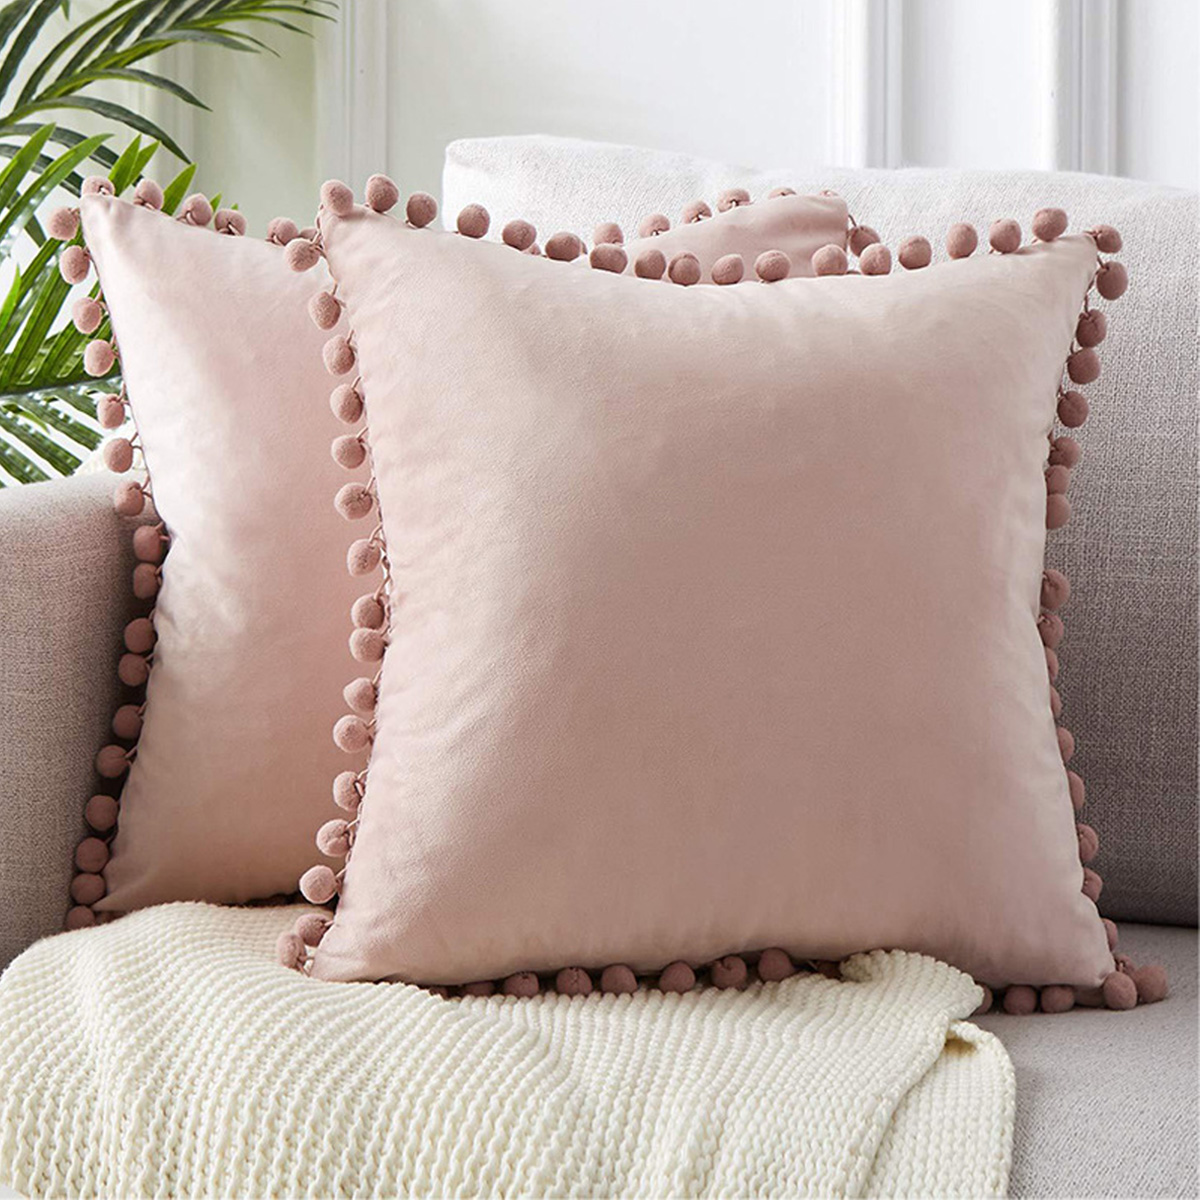 4545cm-Soft-Velvet-Pillow-Covers-Cute-Pom-Poms-Throw-Pillow-Covers-Square-Cushion-Case-for-Sofa-Couc-1779027-4